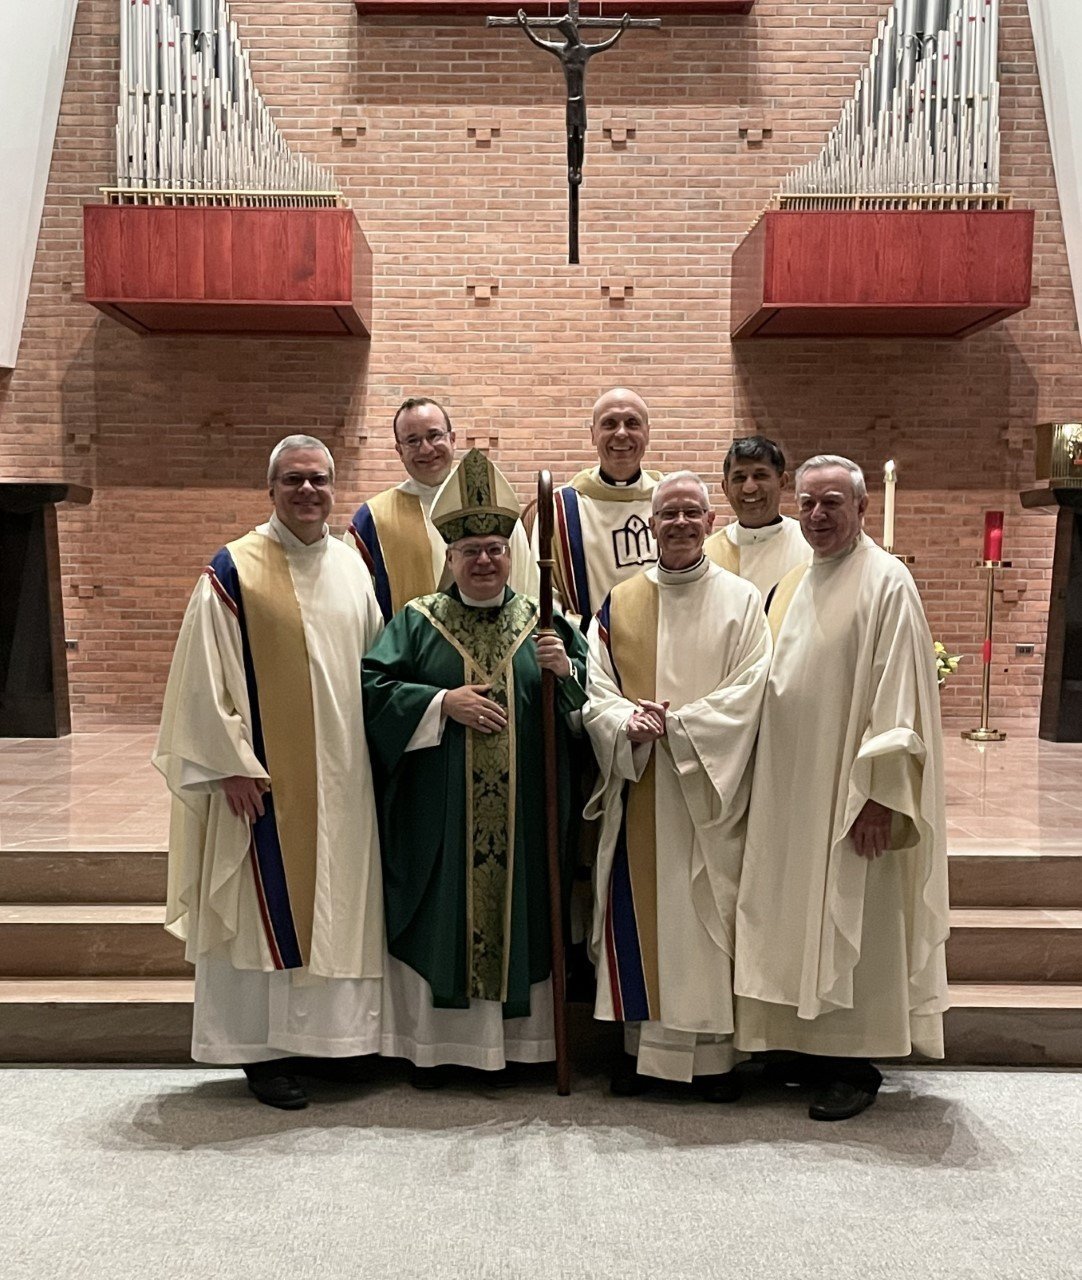  DeSales University: Mass for the Feast of St. Francis de Sales was celebrated by Allentown’s Bishop Alfred Schlert at the Connelly Chapel.  L-R: Fr. Kevin Nadolski, OSFS, Vice President for Mission; Fr. Dan Lannen, OSFS, University Chaplain; Bishop 